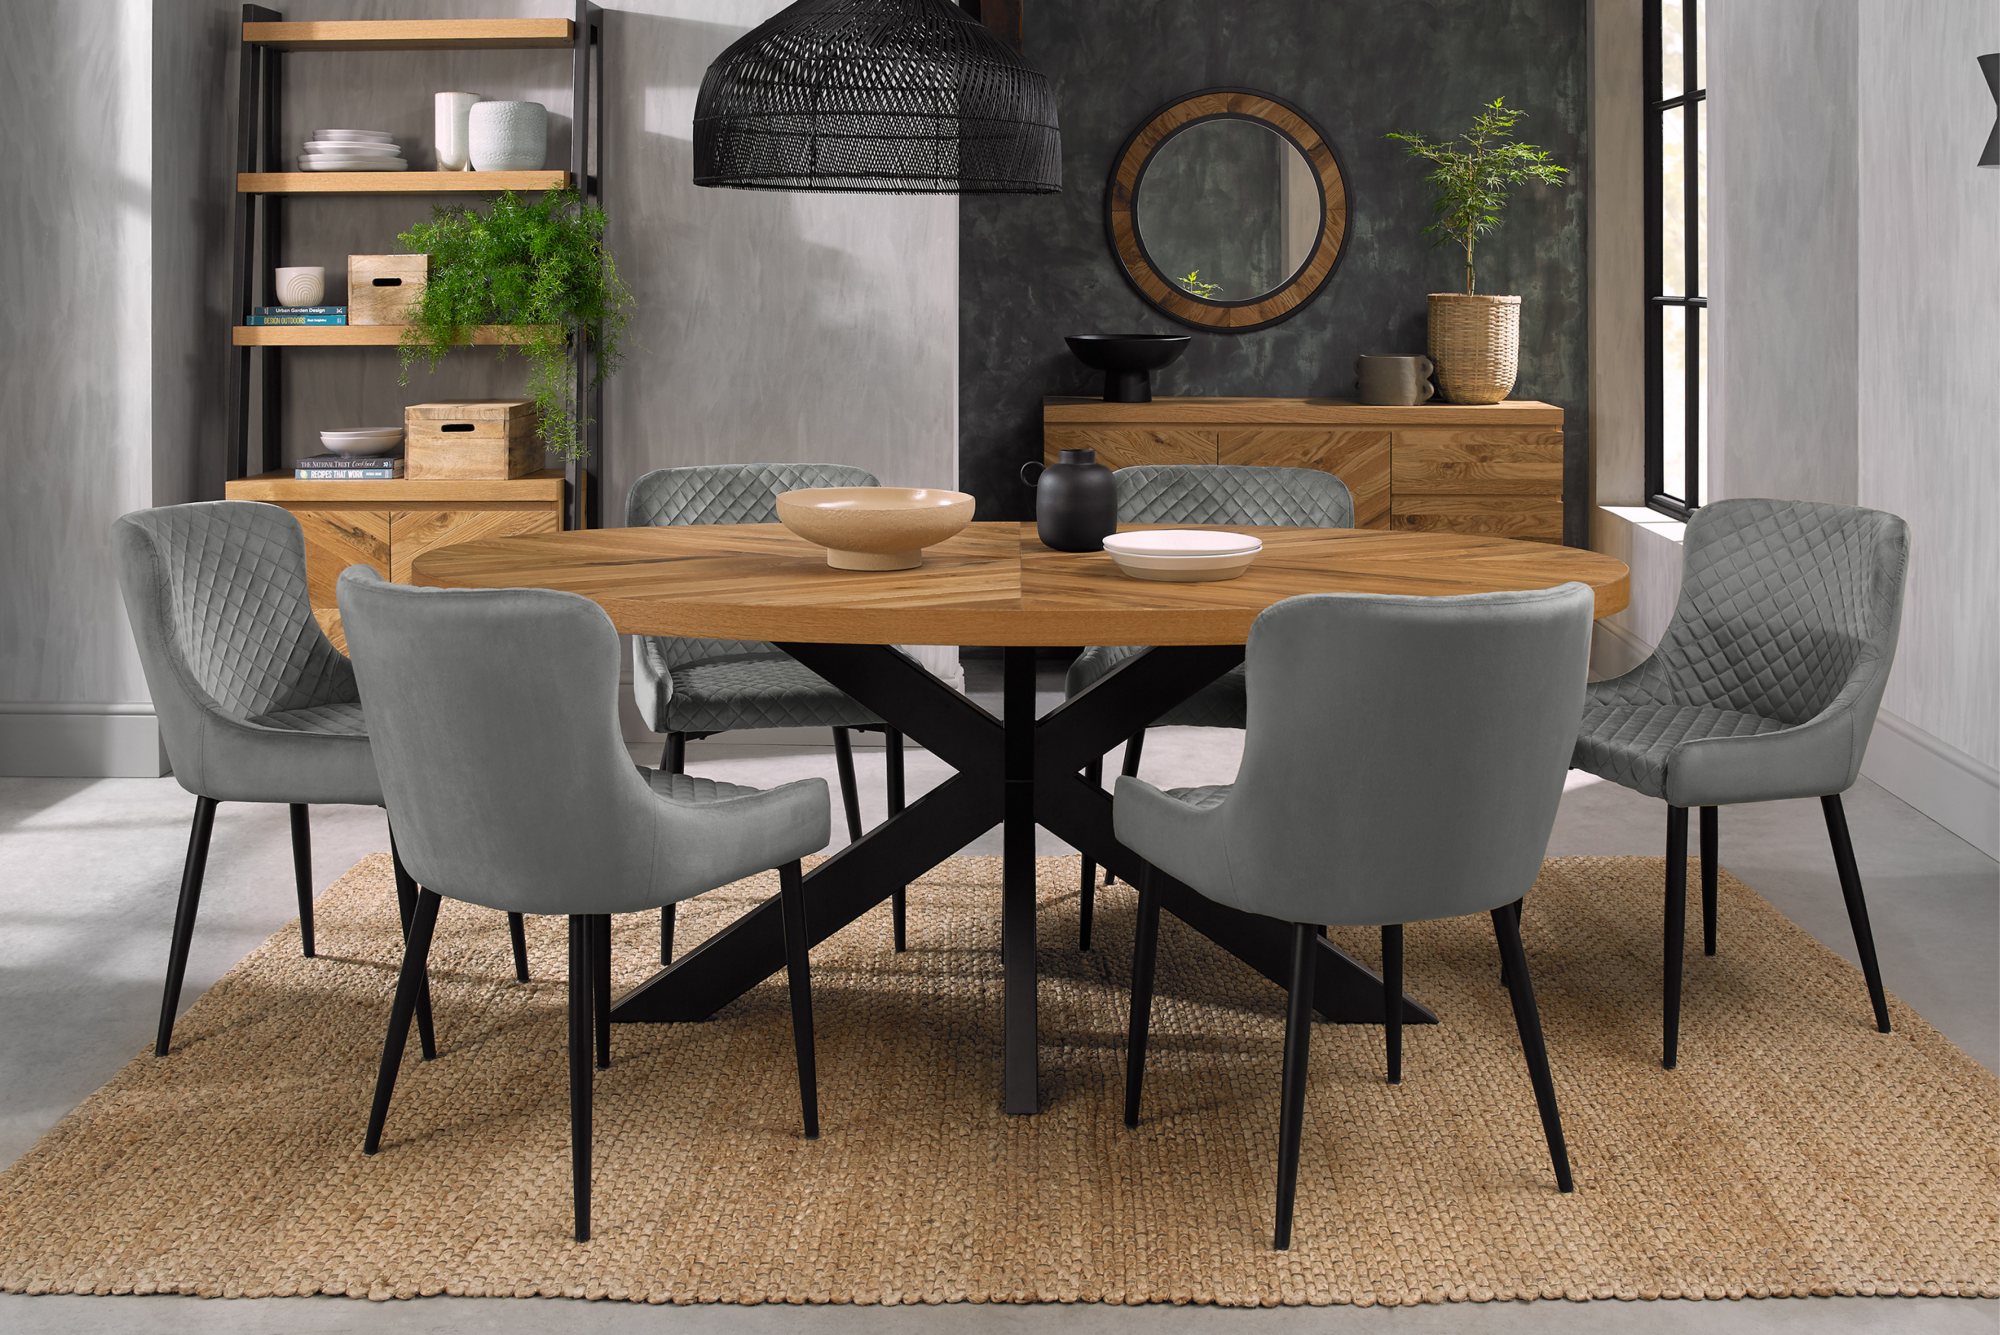 Home Origins Bosco Rustic Oak 6 seater dining table with 6 Cezanne chairs- grey velvet fabric